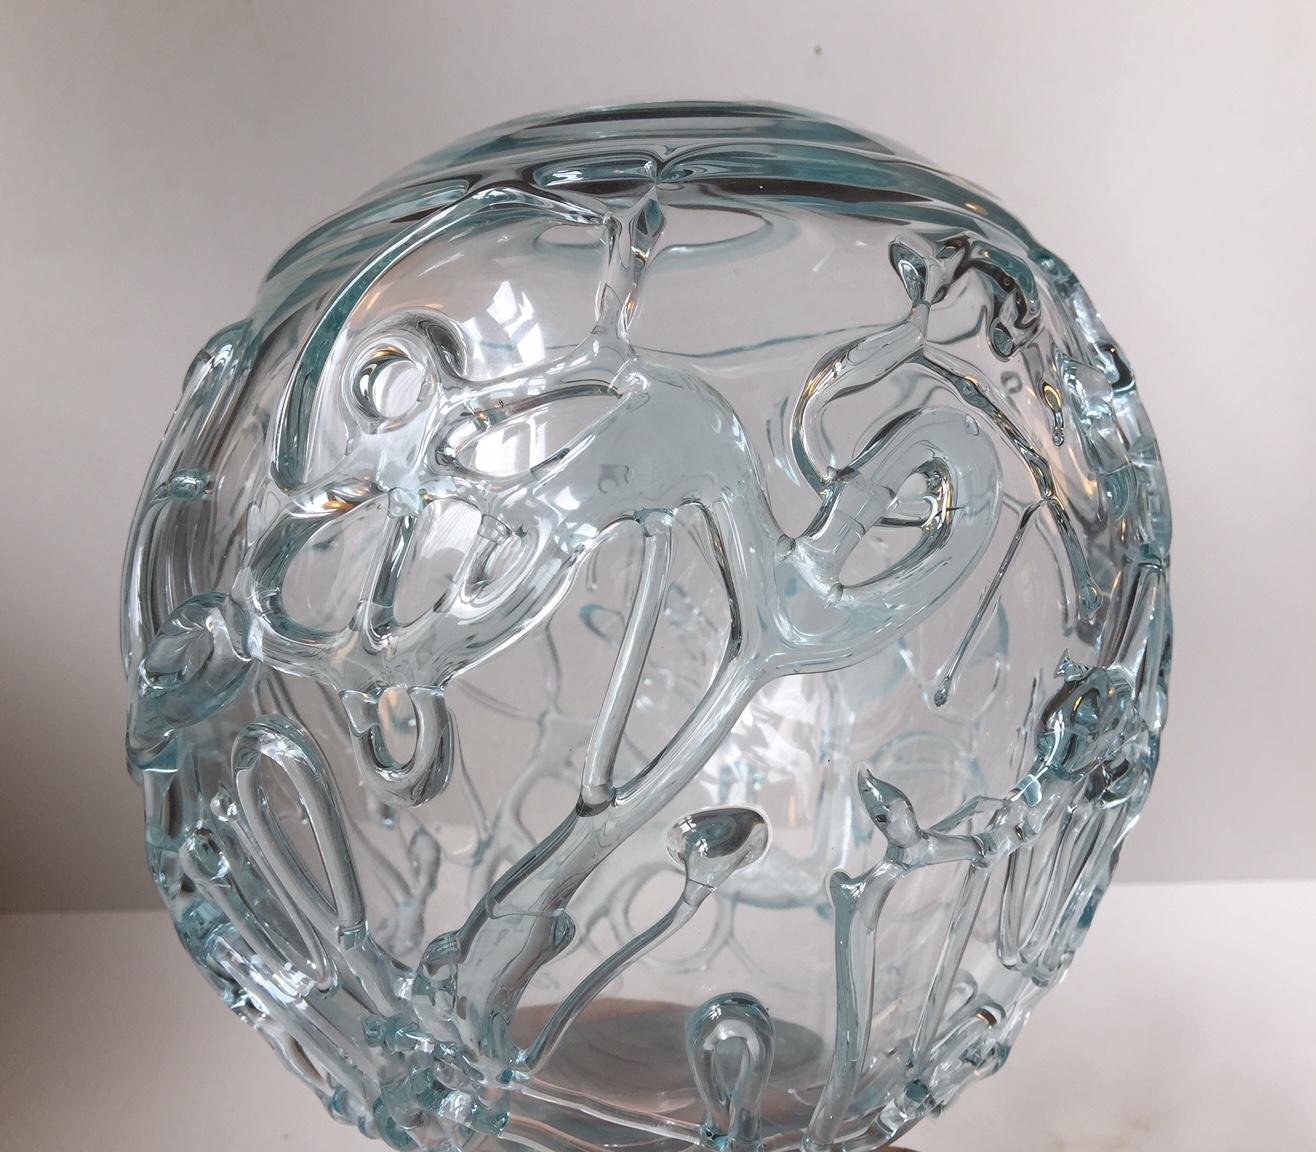 Modern Unique Spherical and Abstract Glass Vase by Michael Bang for Holmegaard, Denmark